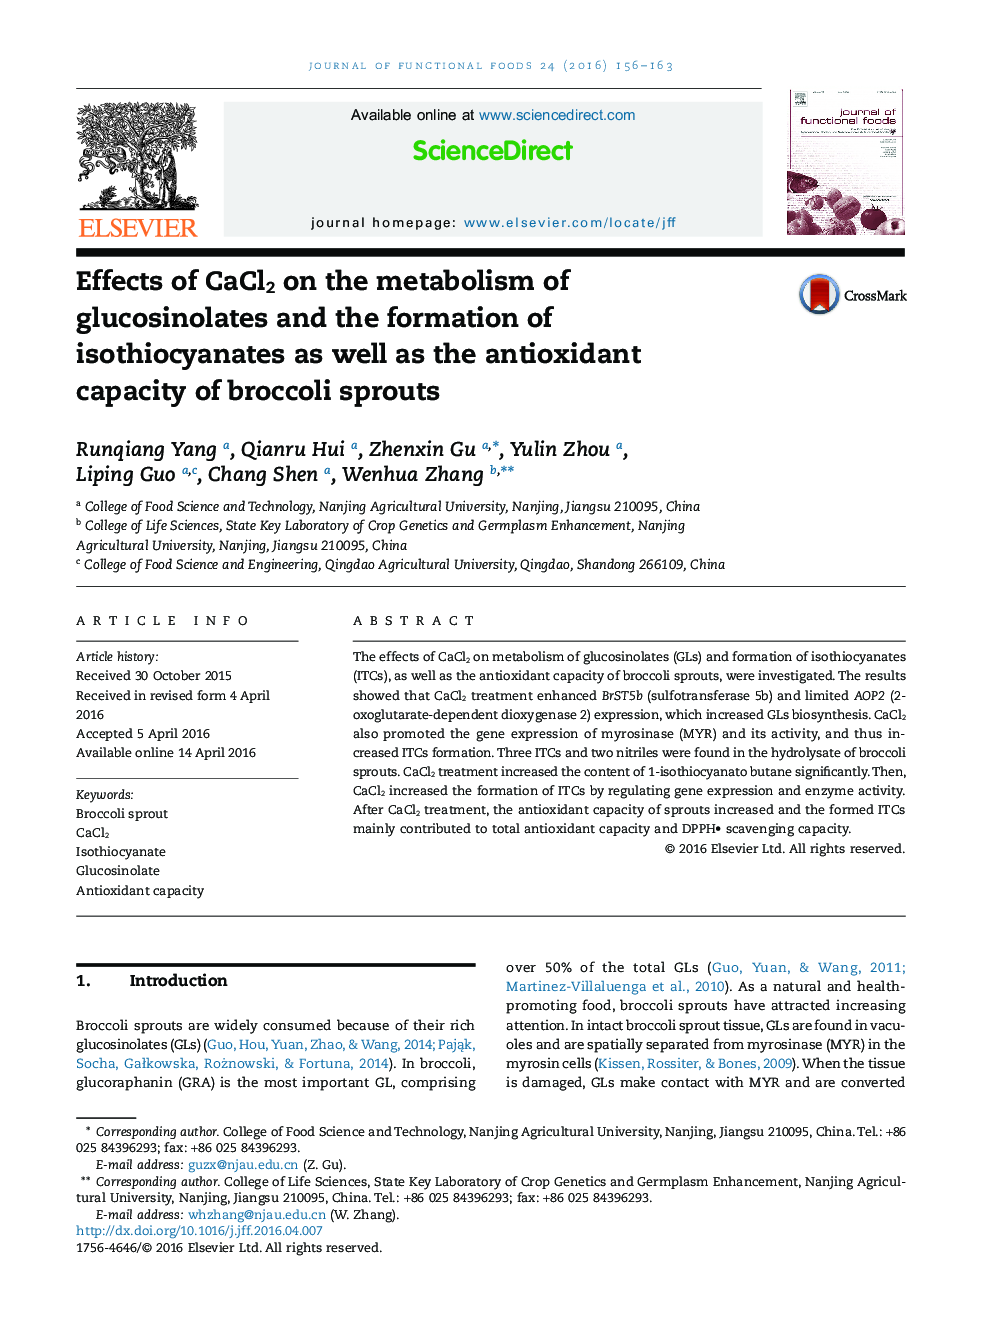 Effects of CaCl2 on the metabolism of glucosinolates and the formation of isothiocyanates as well as the antioxidant capacity of broccoli sprouts